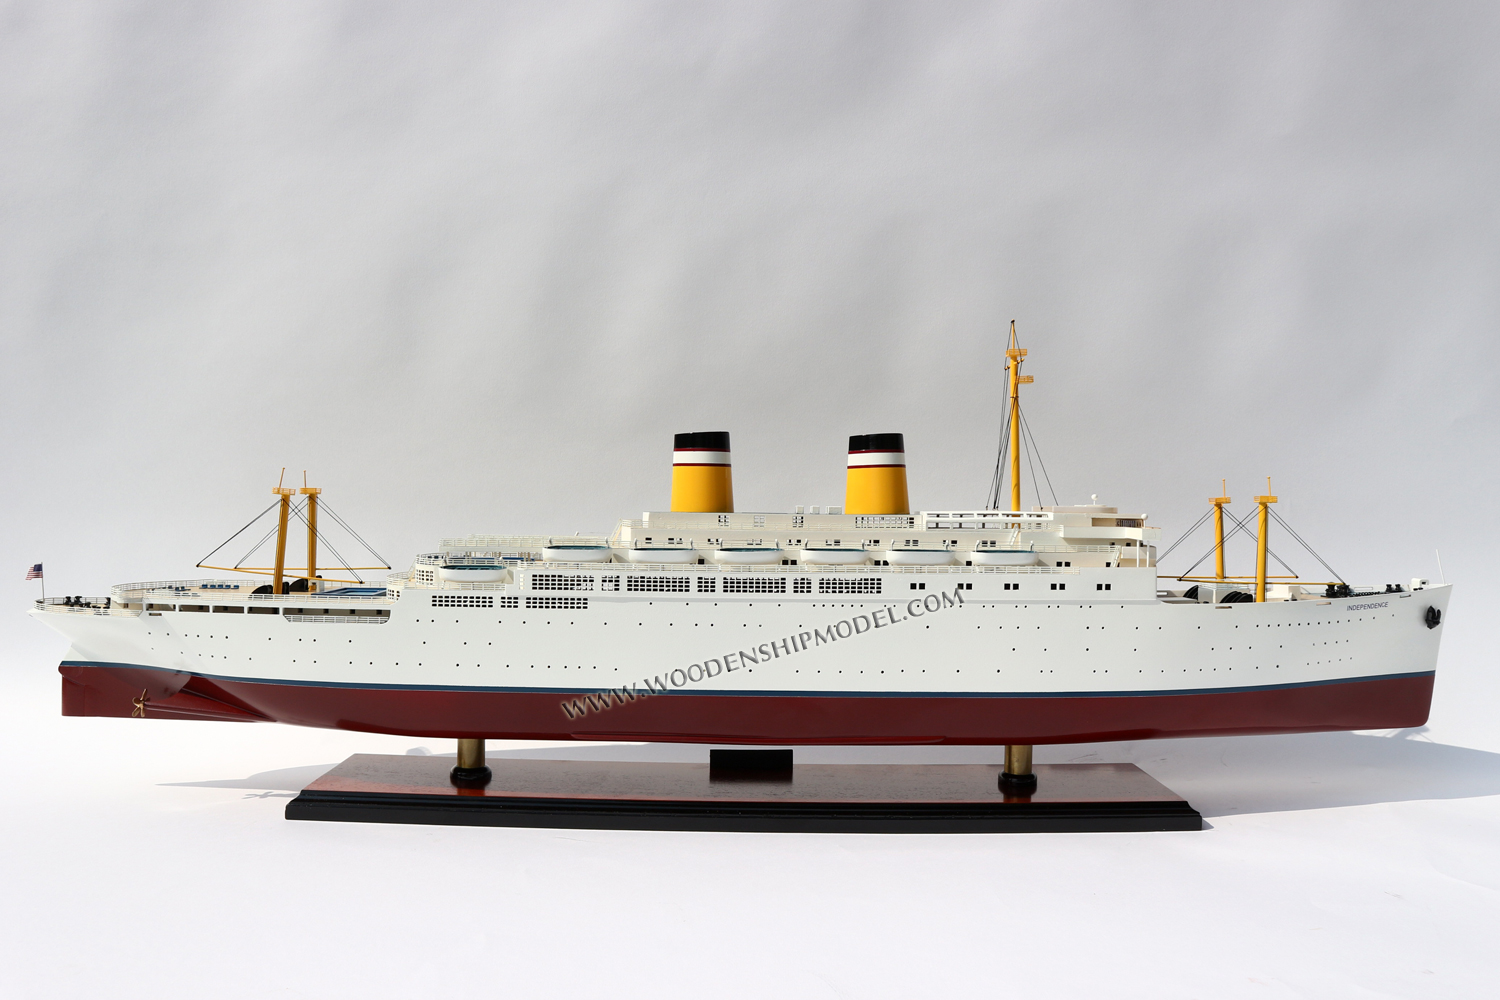 SS INDEPENDENCE model ship